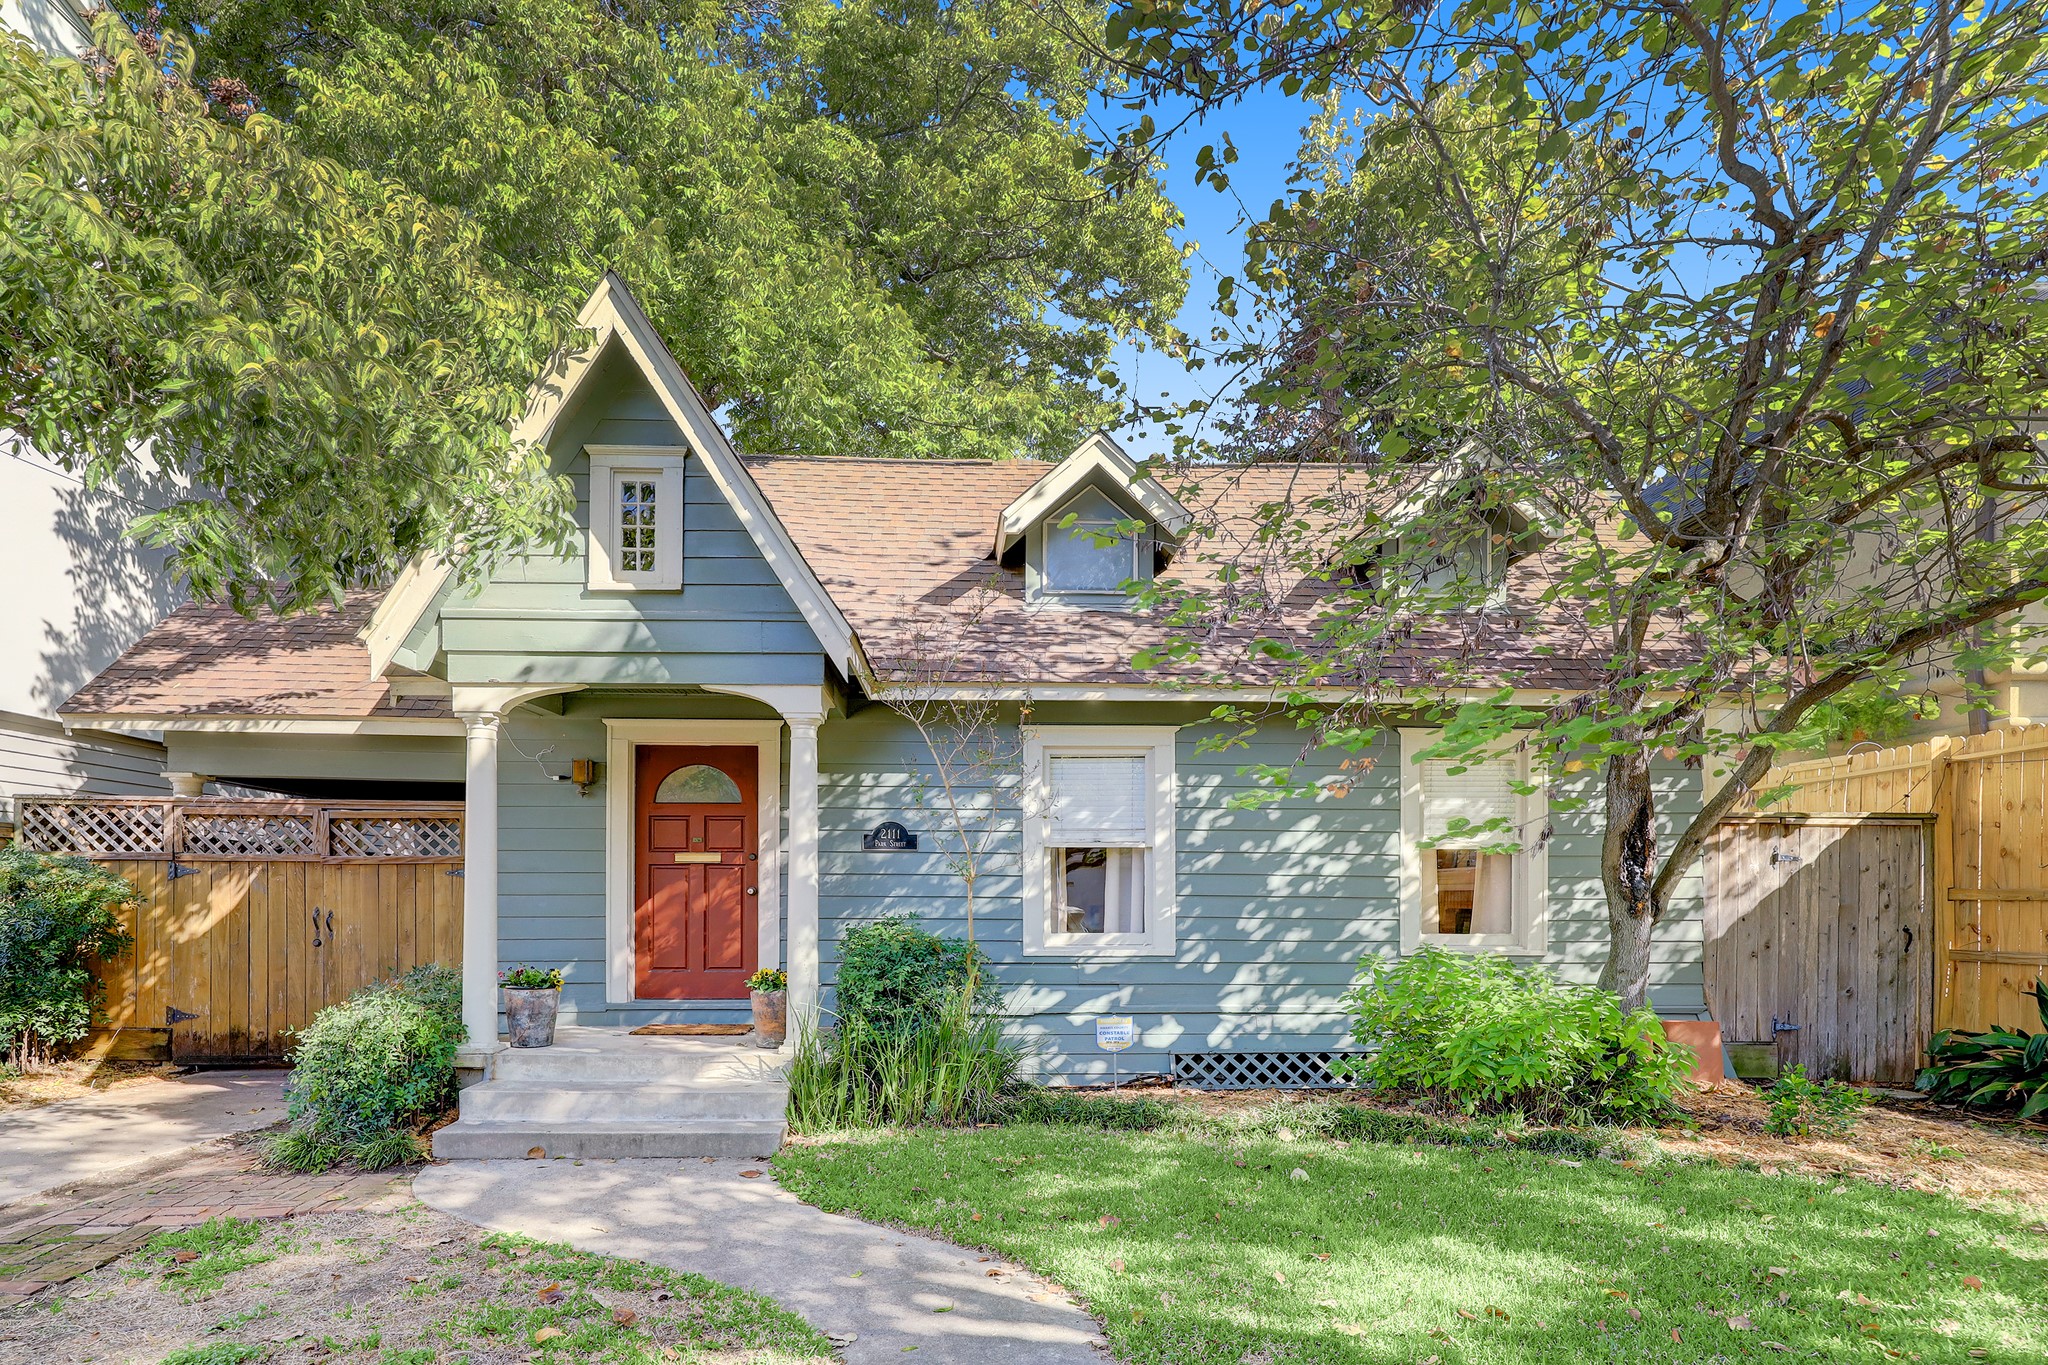 Triple Gable English Cottage in the Heart of the River Oaks Shopping Center!  This cozy home has wonderful curb appeal and a great floor plan.